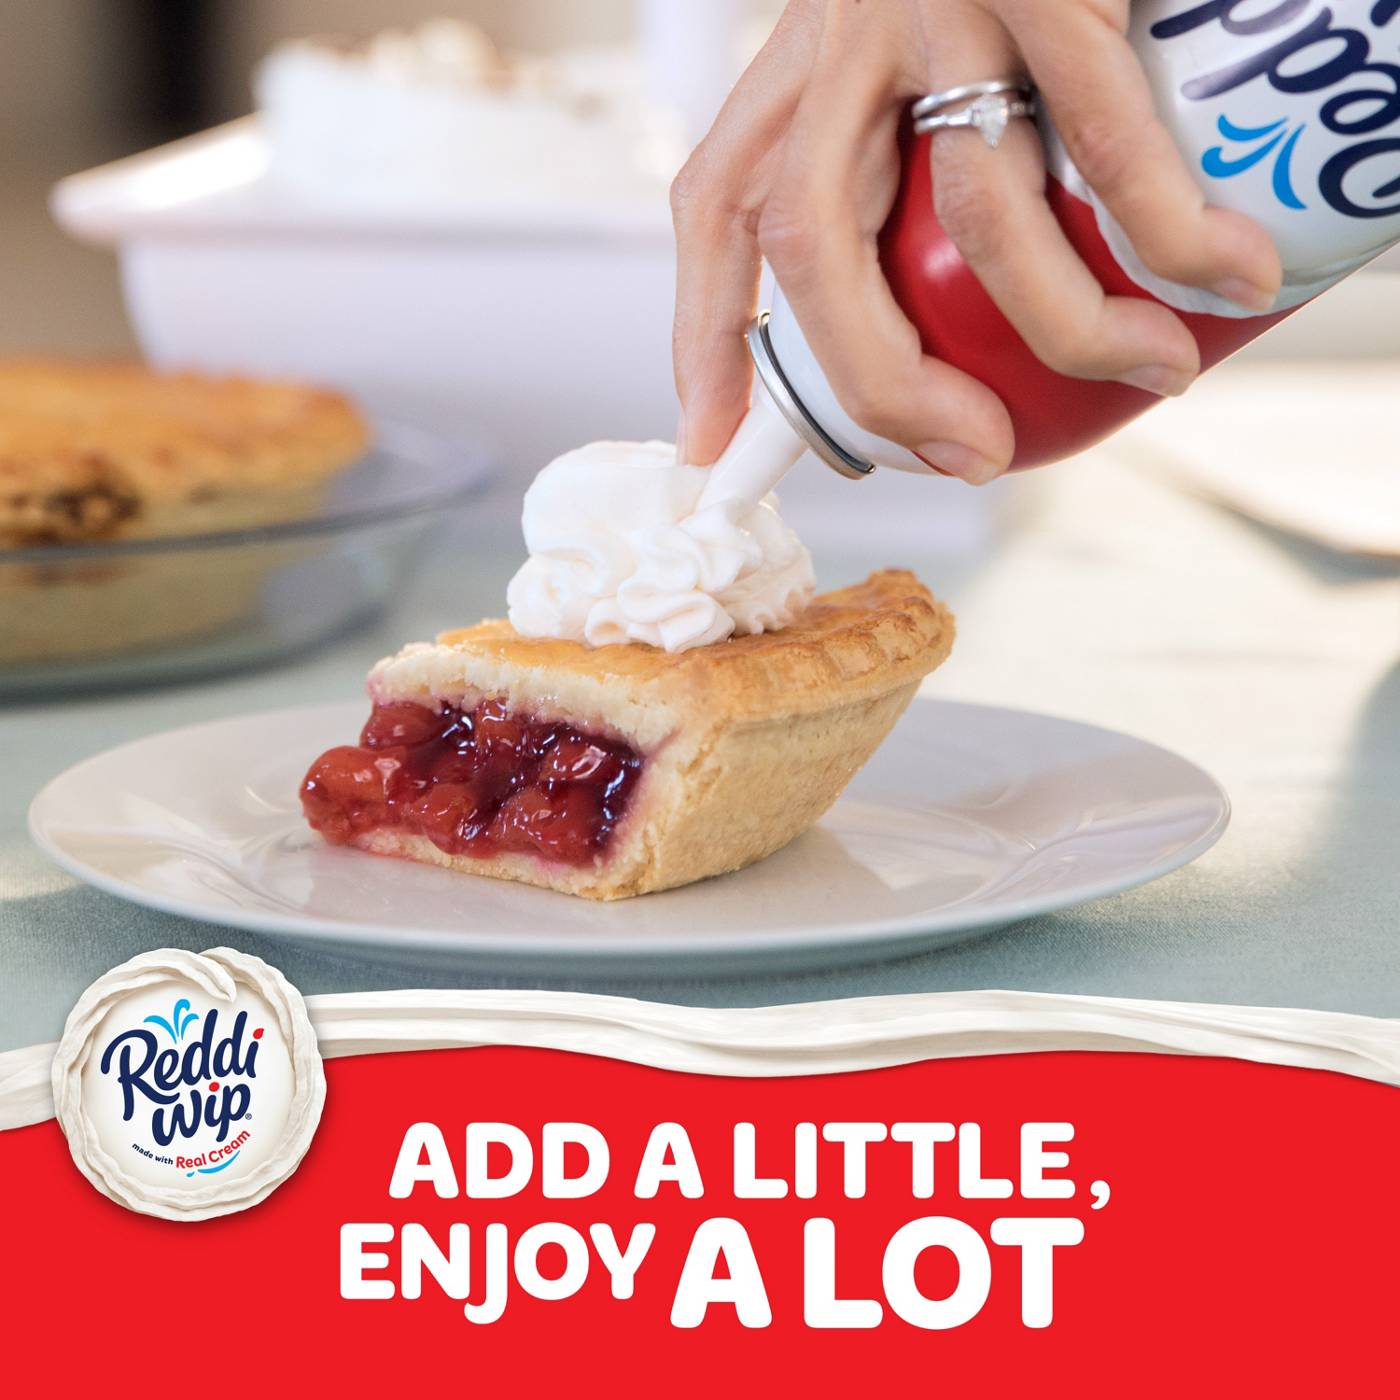 Reddi Wip Original Whipped Topping Made with Real Cream - Shop Sundae  Toppings at H-E-B